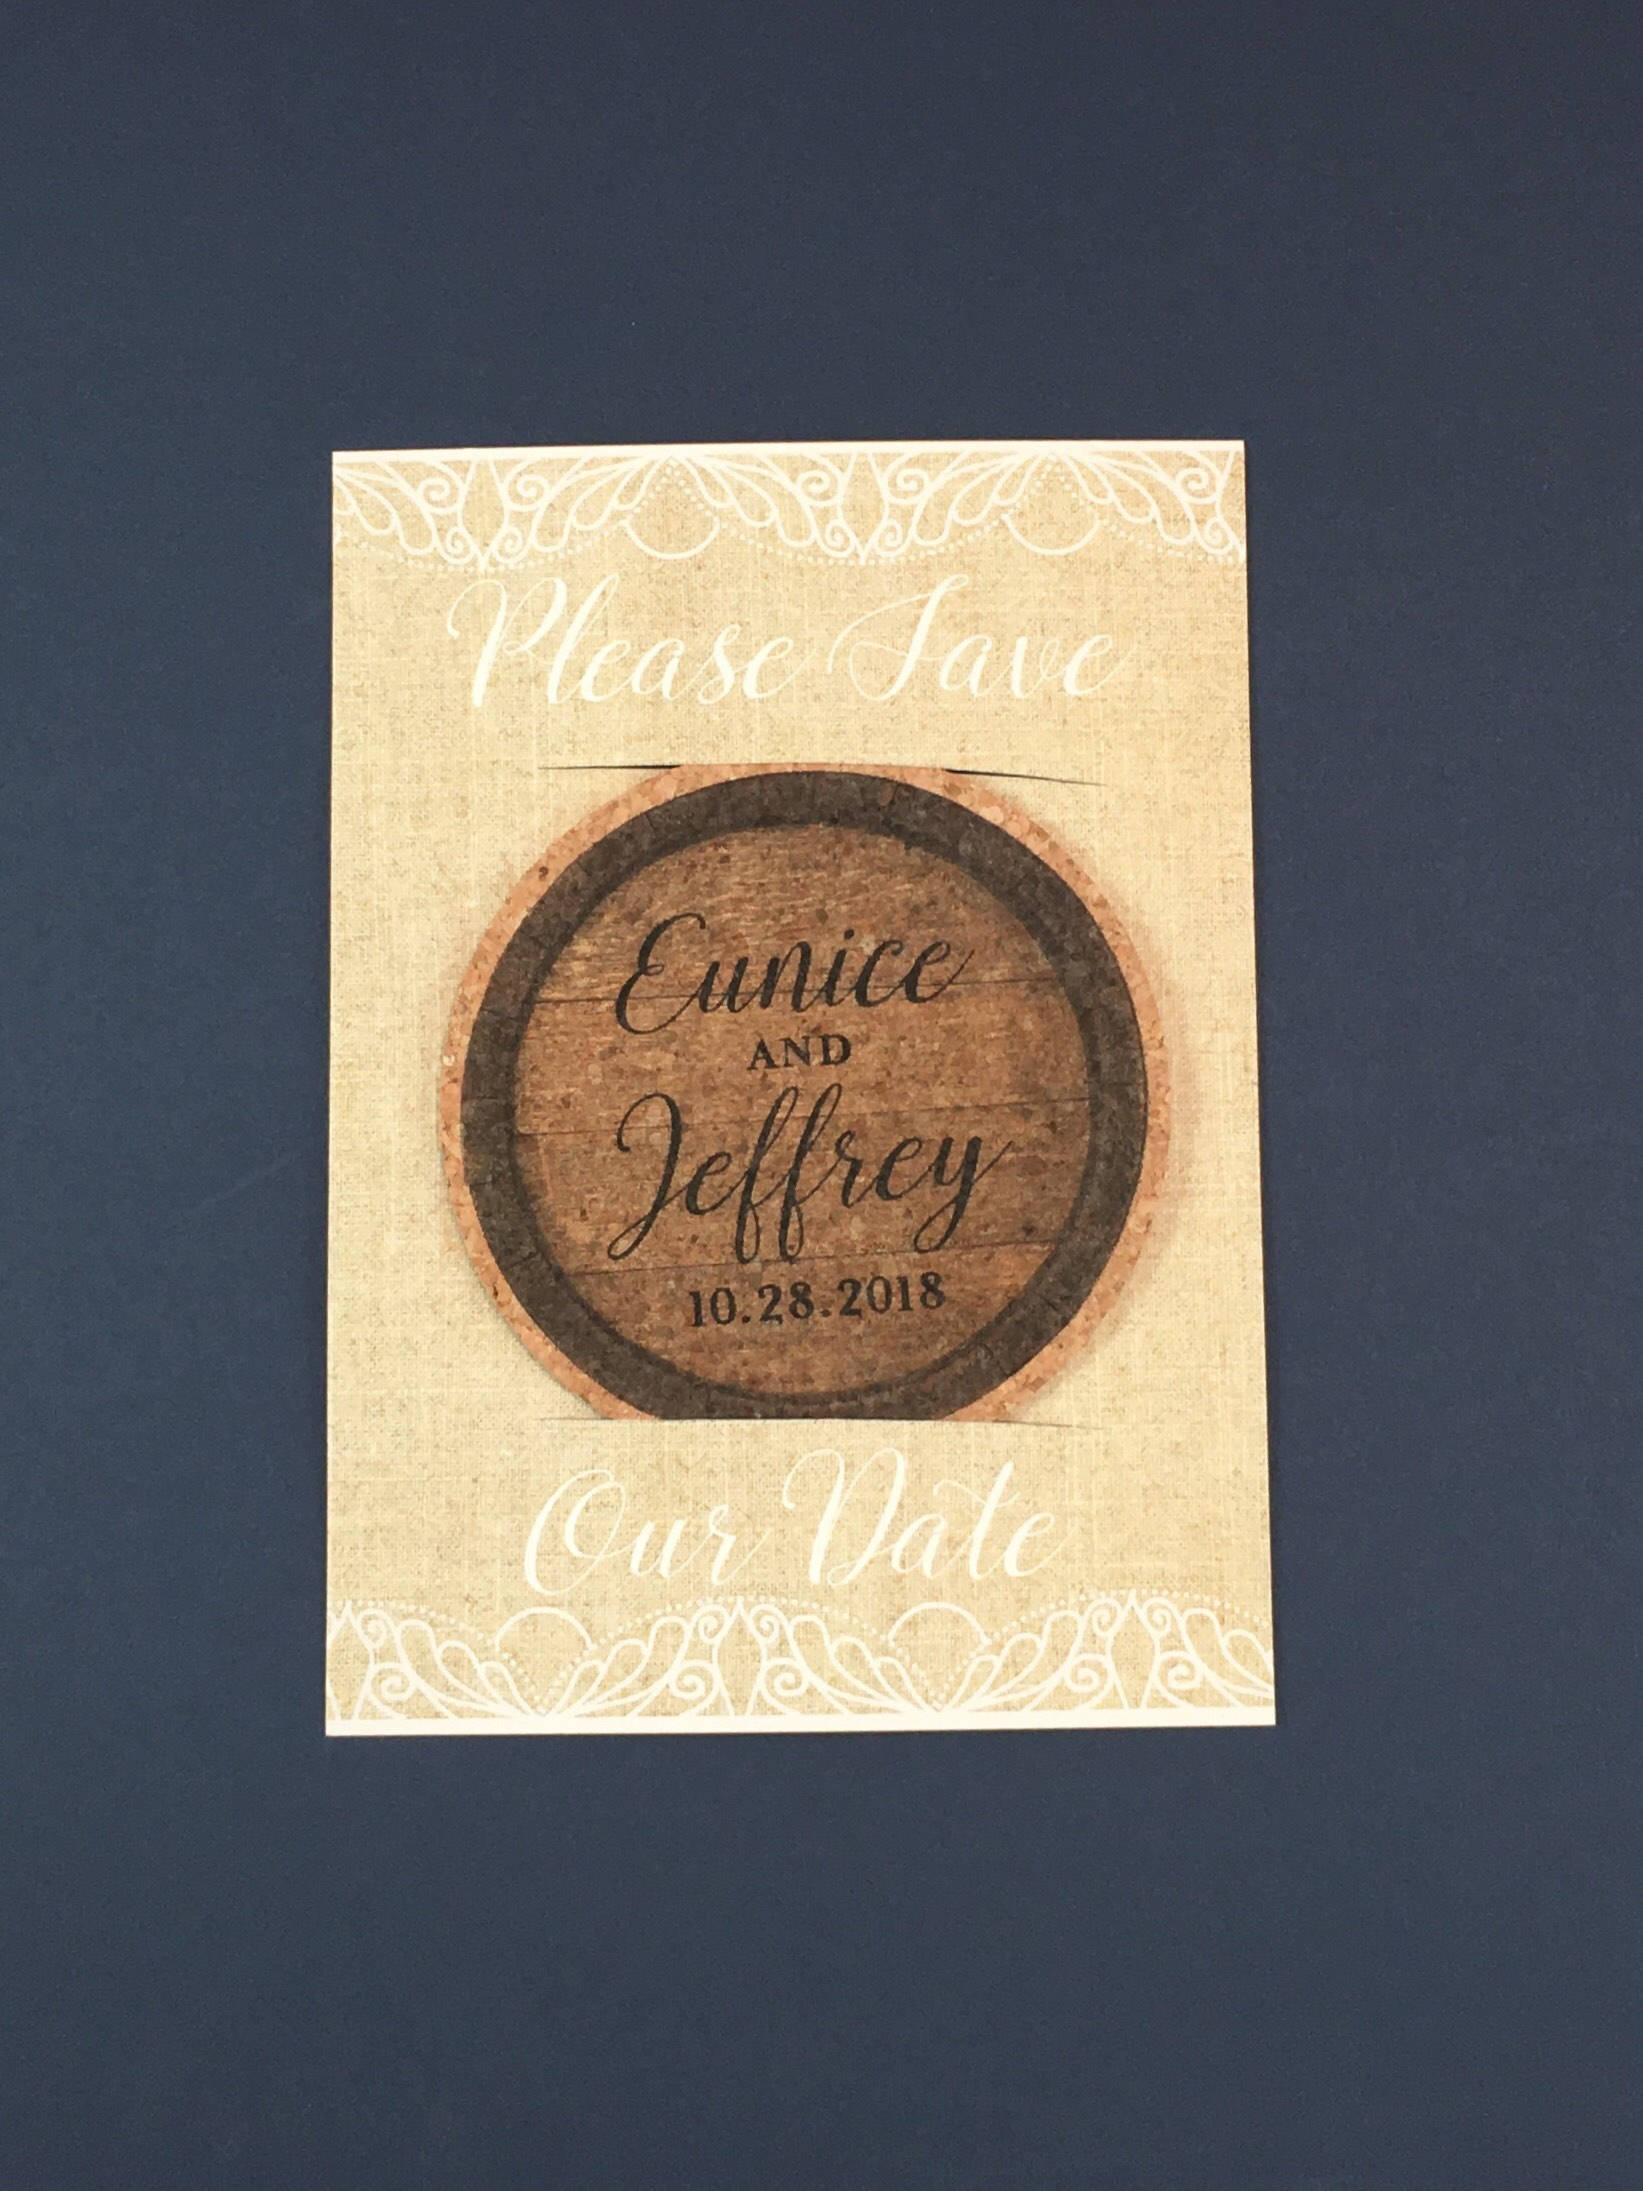 Rustic Lace and Linen with Wine Barrel Cork Coaster Save the Date Includes A7 Envelopes